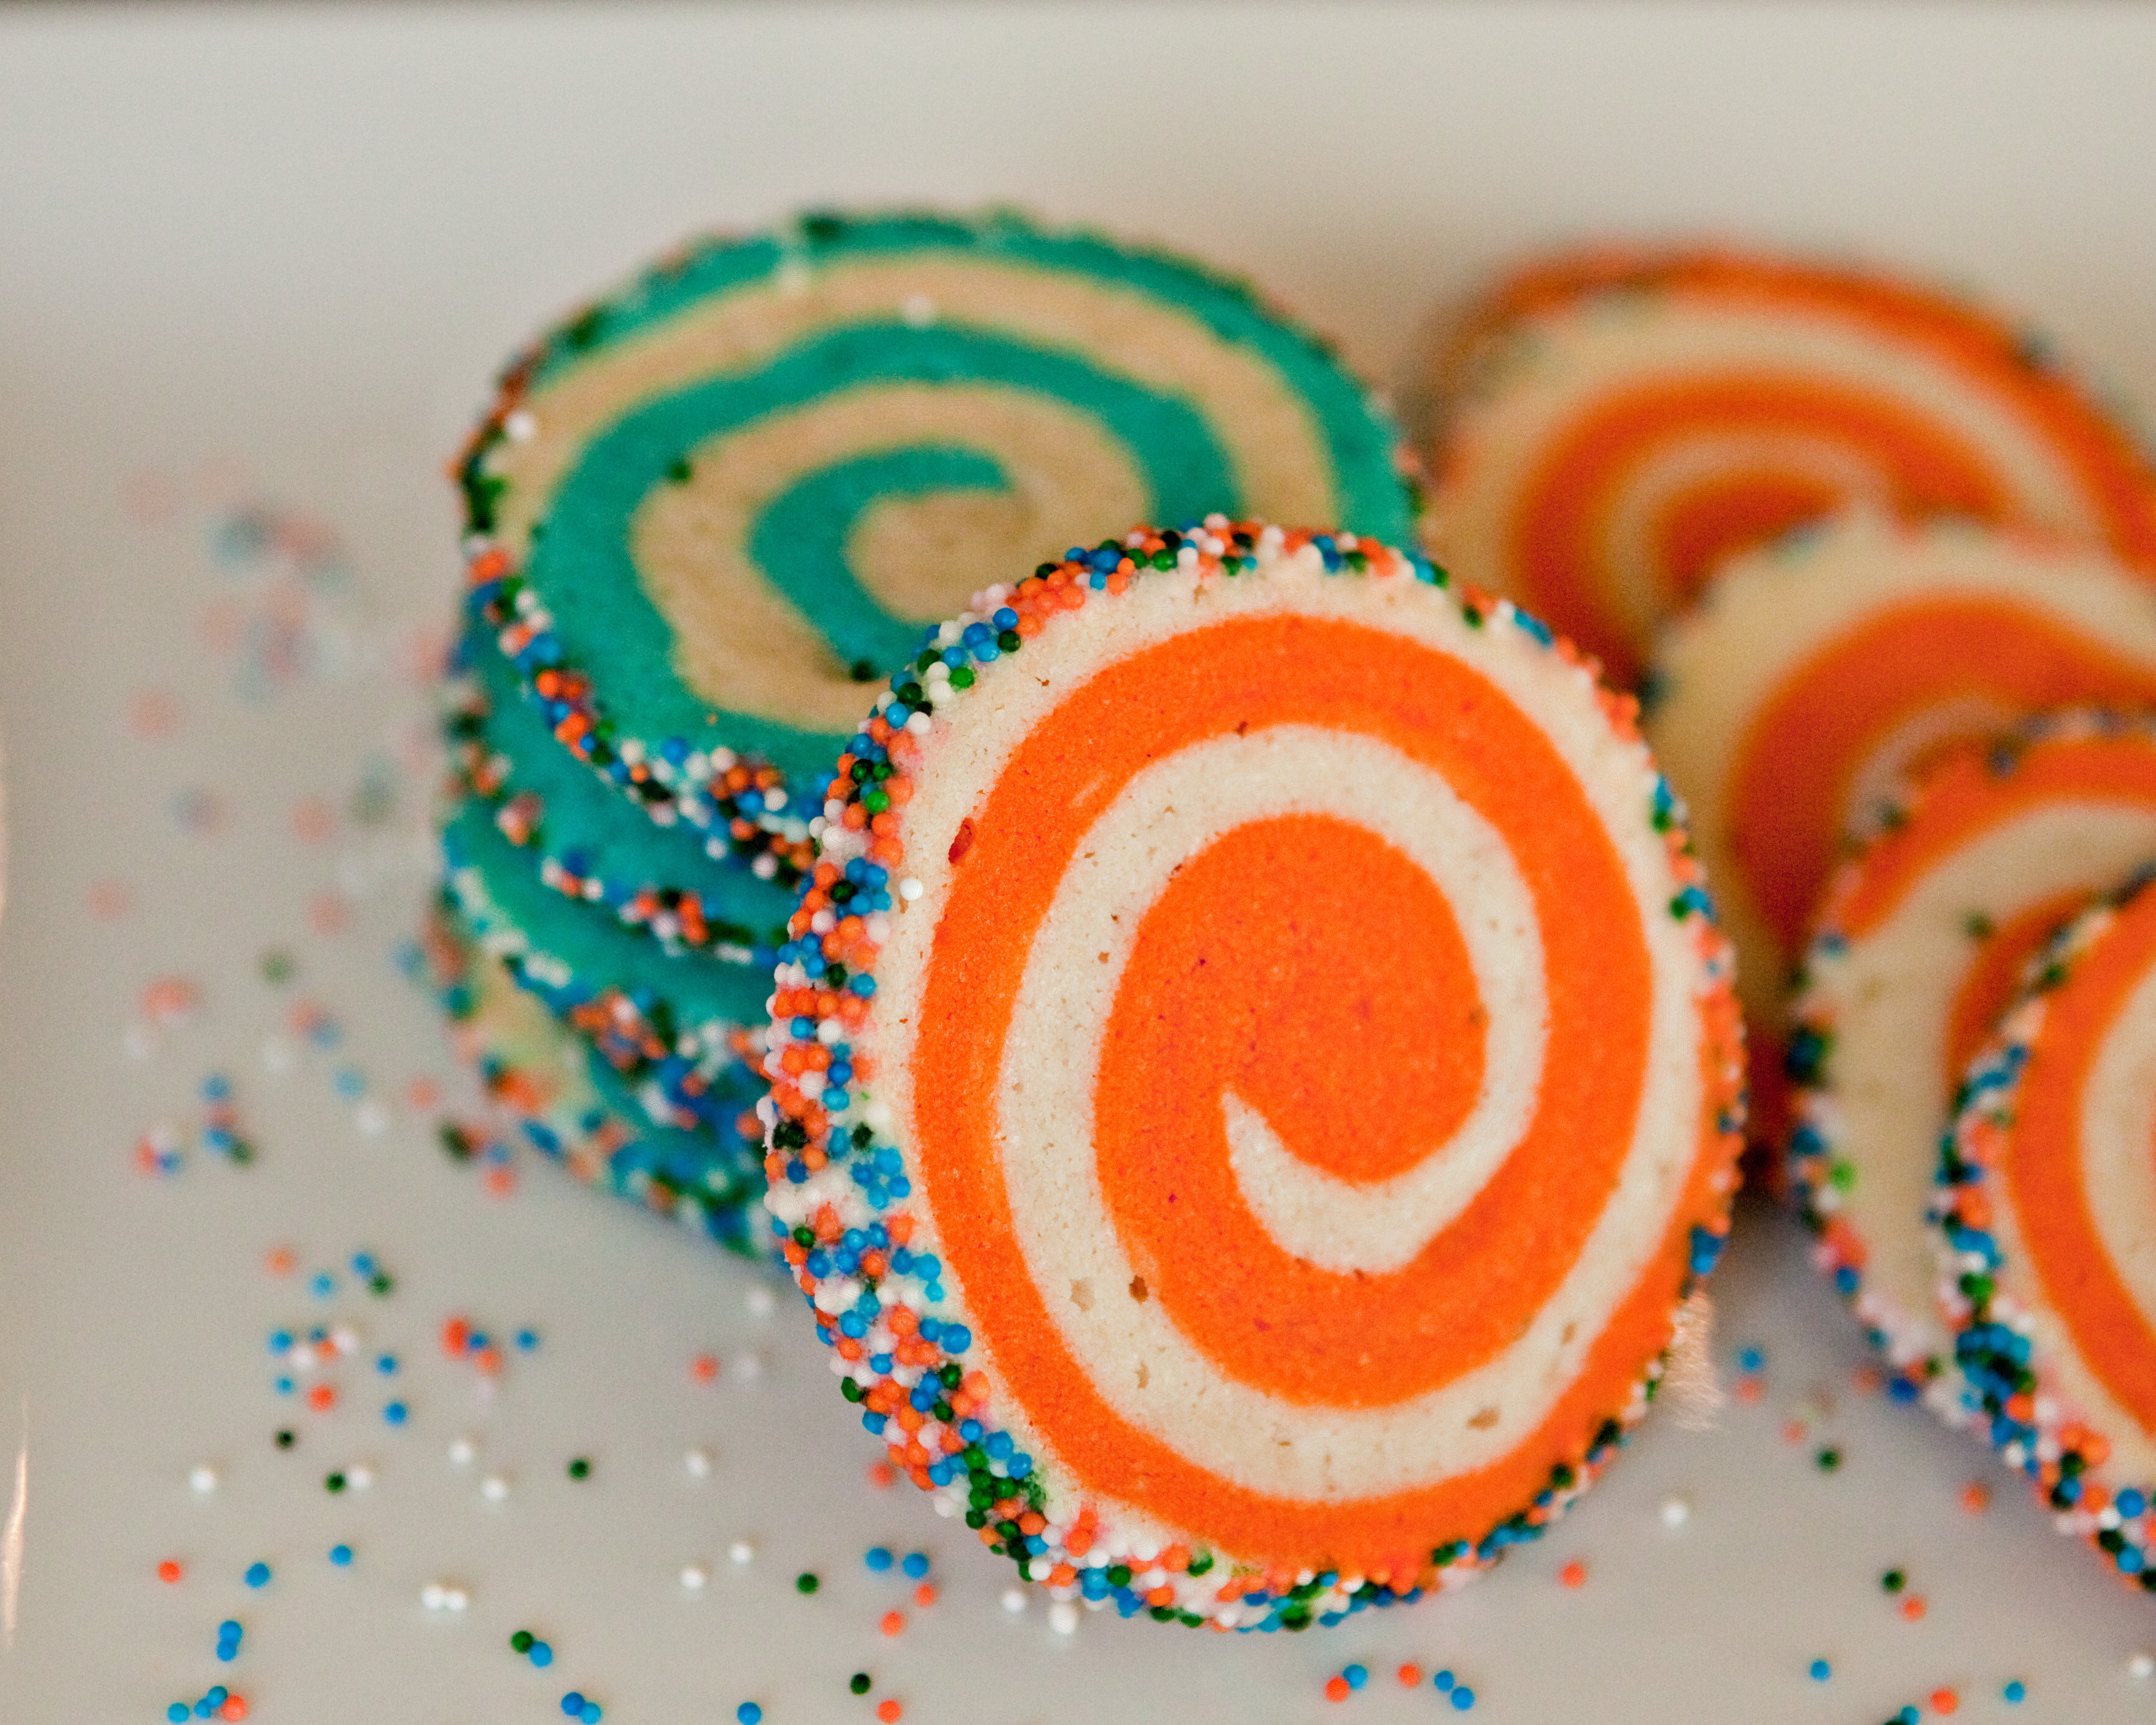 Colorful Christmas Cookies
 Colorful Spiral Cookies